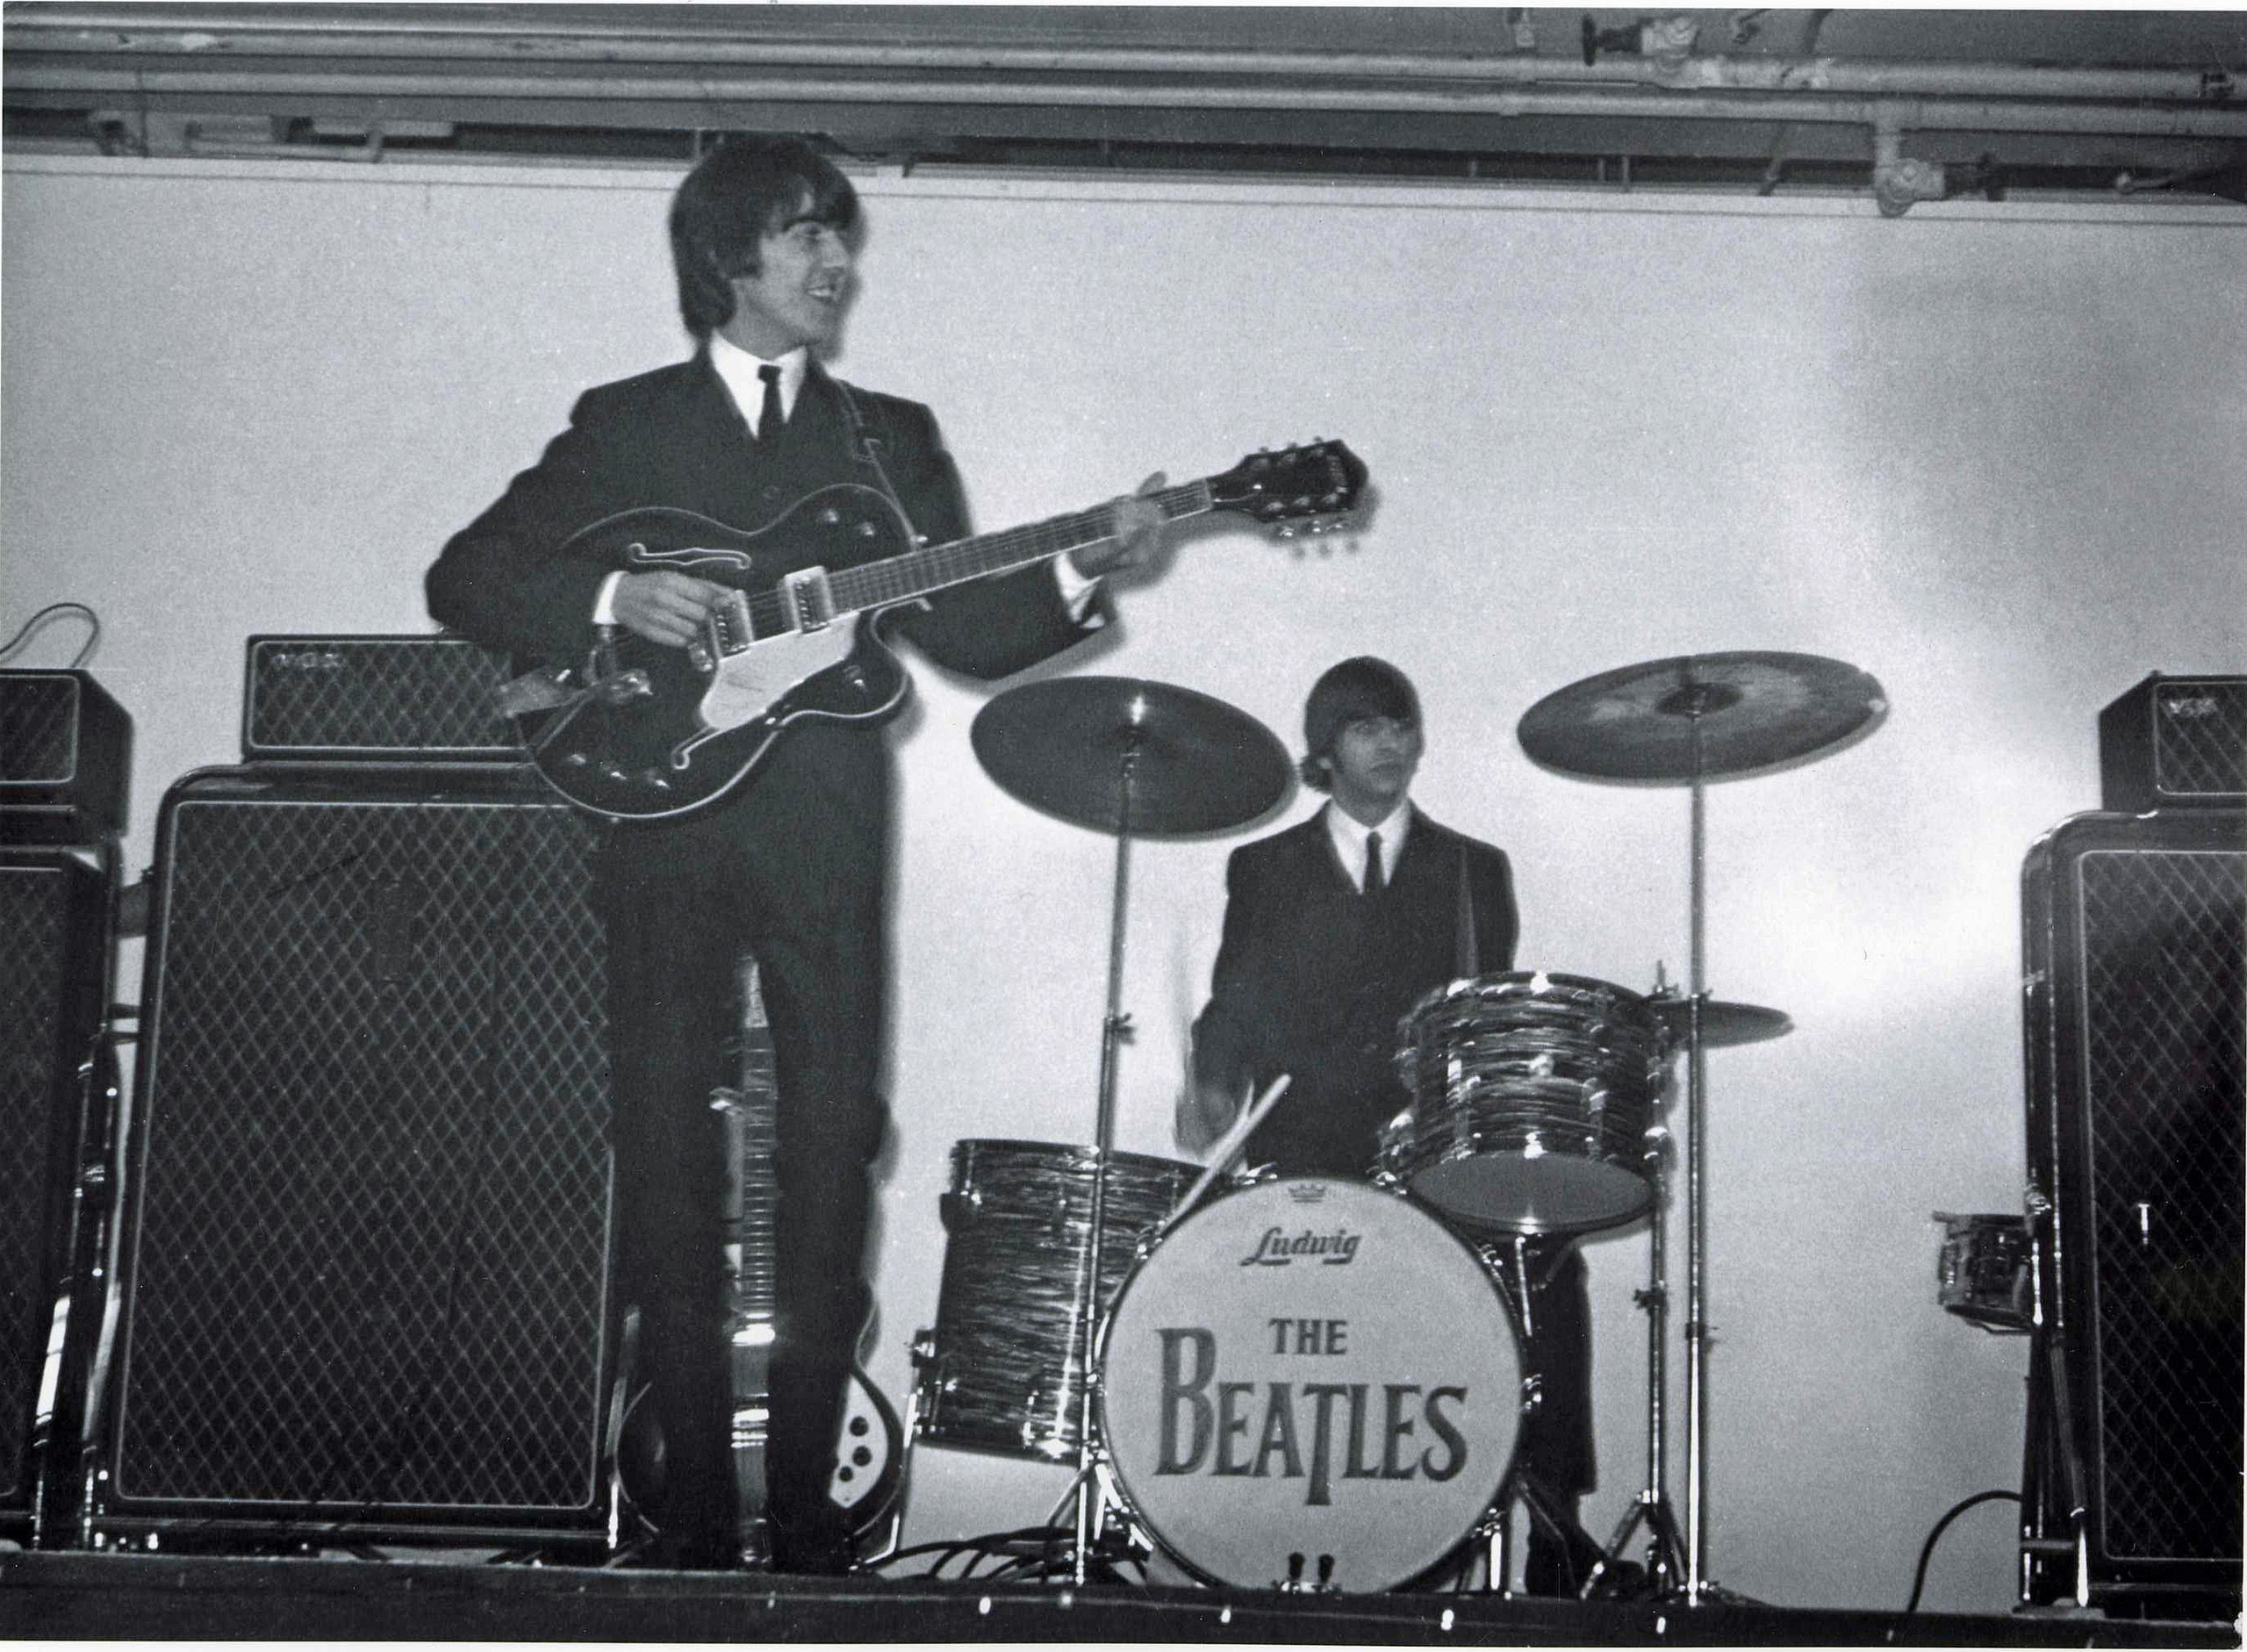 Harrison (left) and Ringo Starr (right) performing at the King's Hall in Belfast, 1964